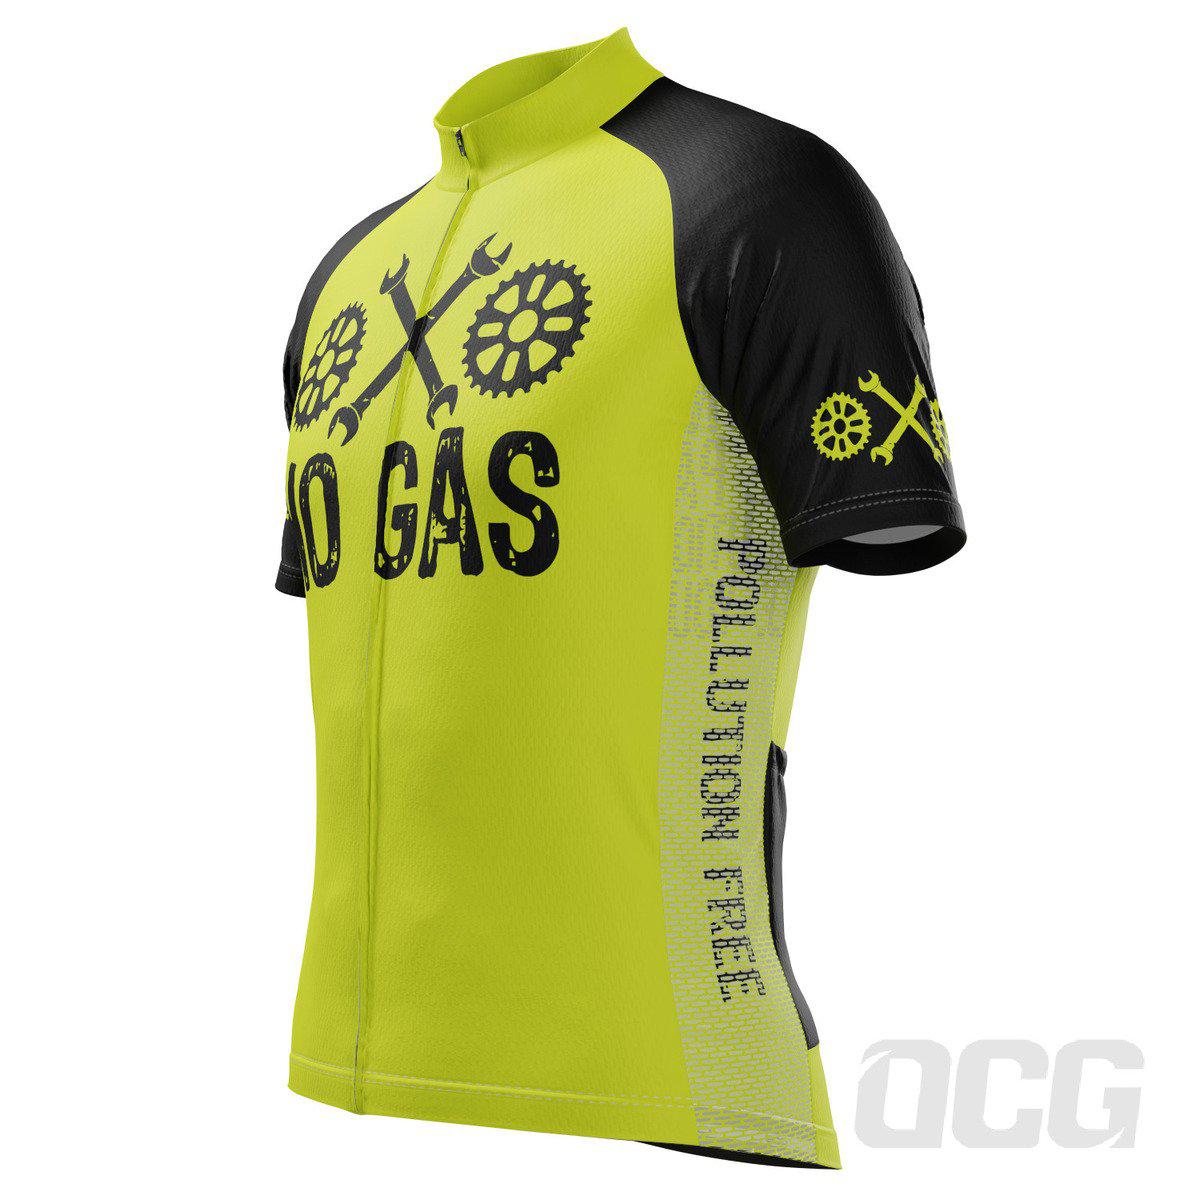 Men's No Gas Pollution Free Short Sleeve Cycling Jersey